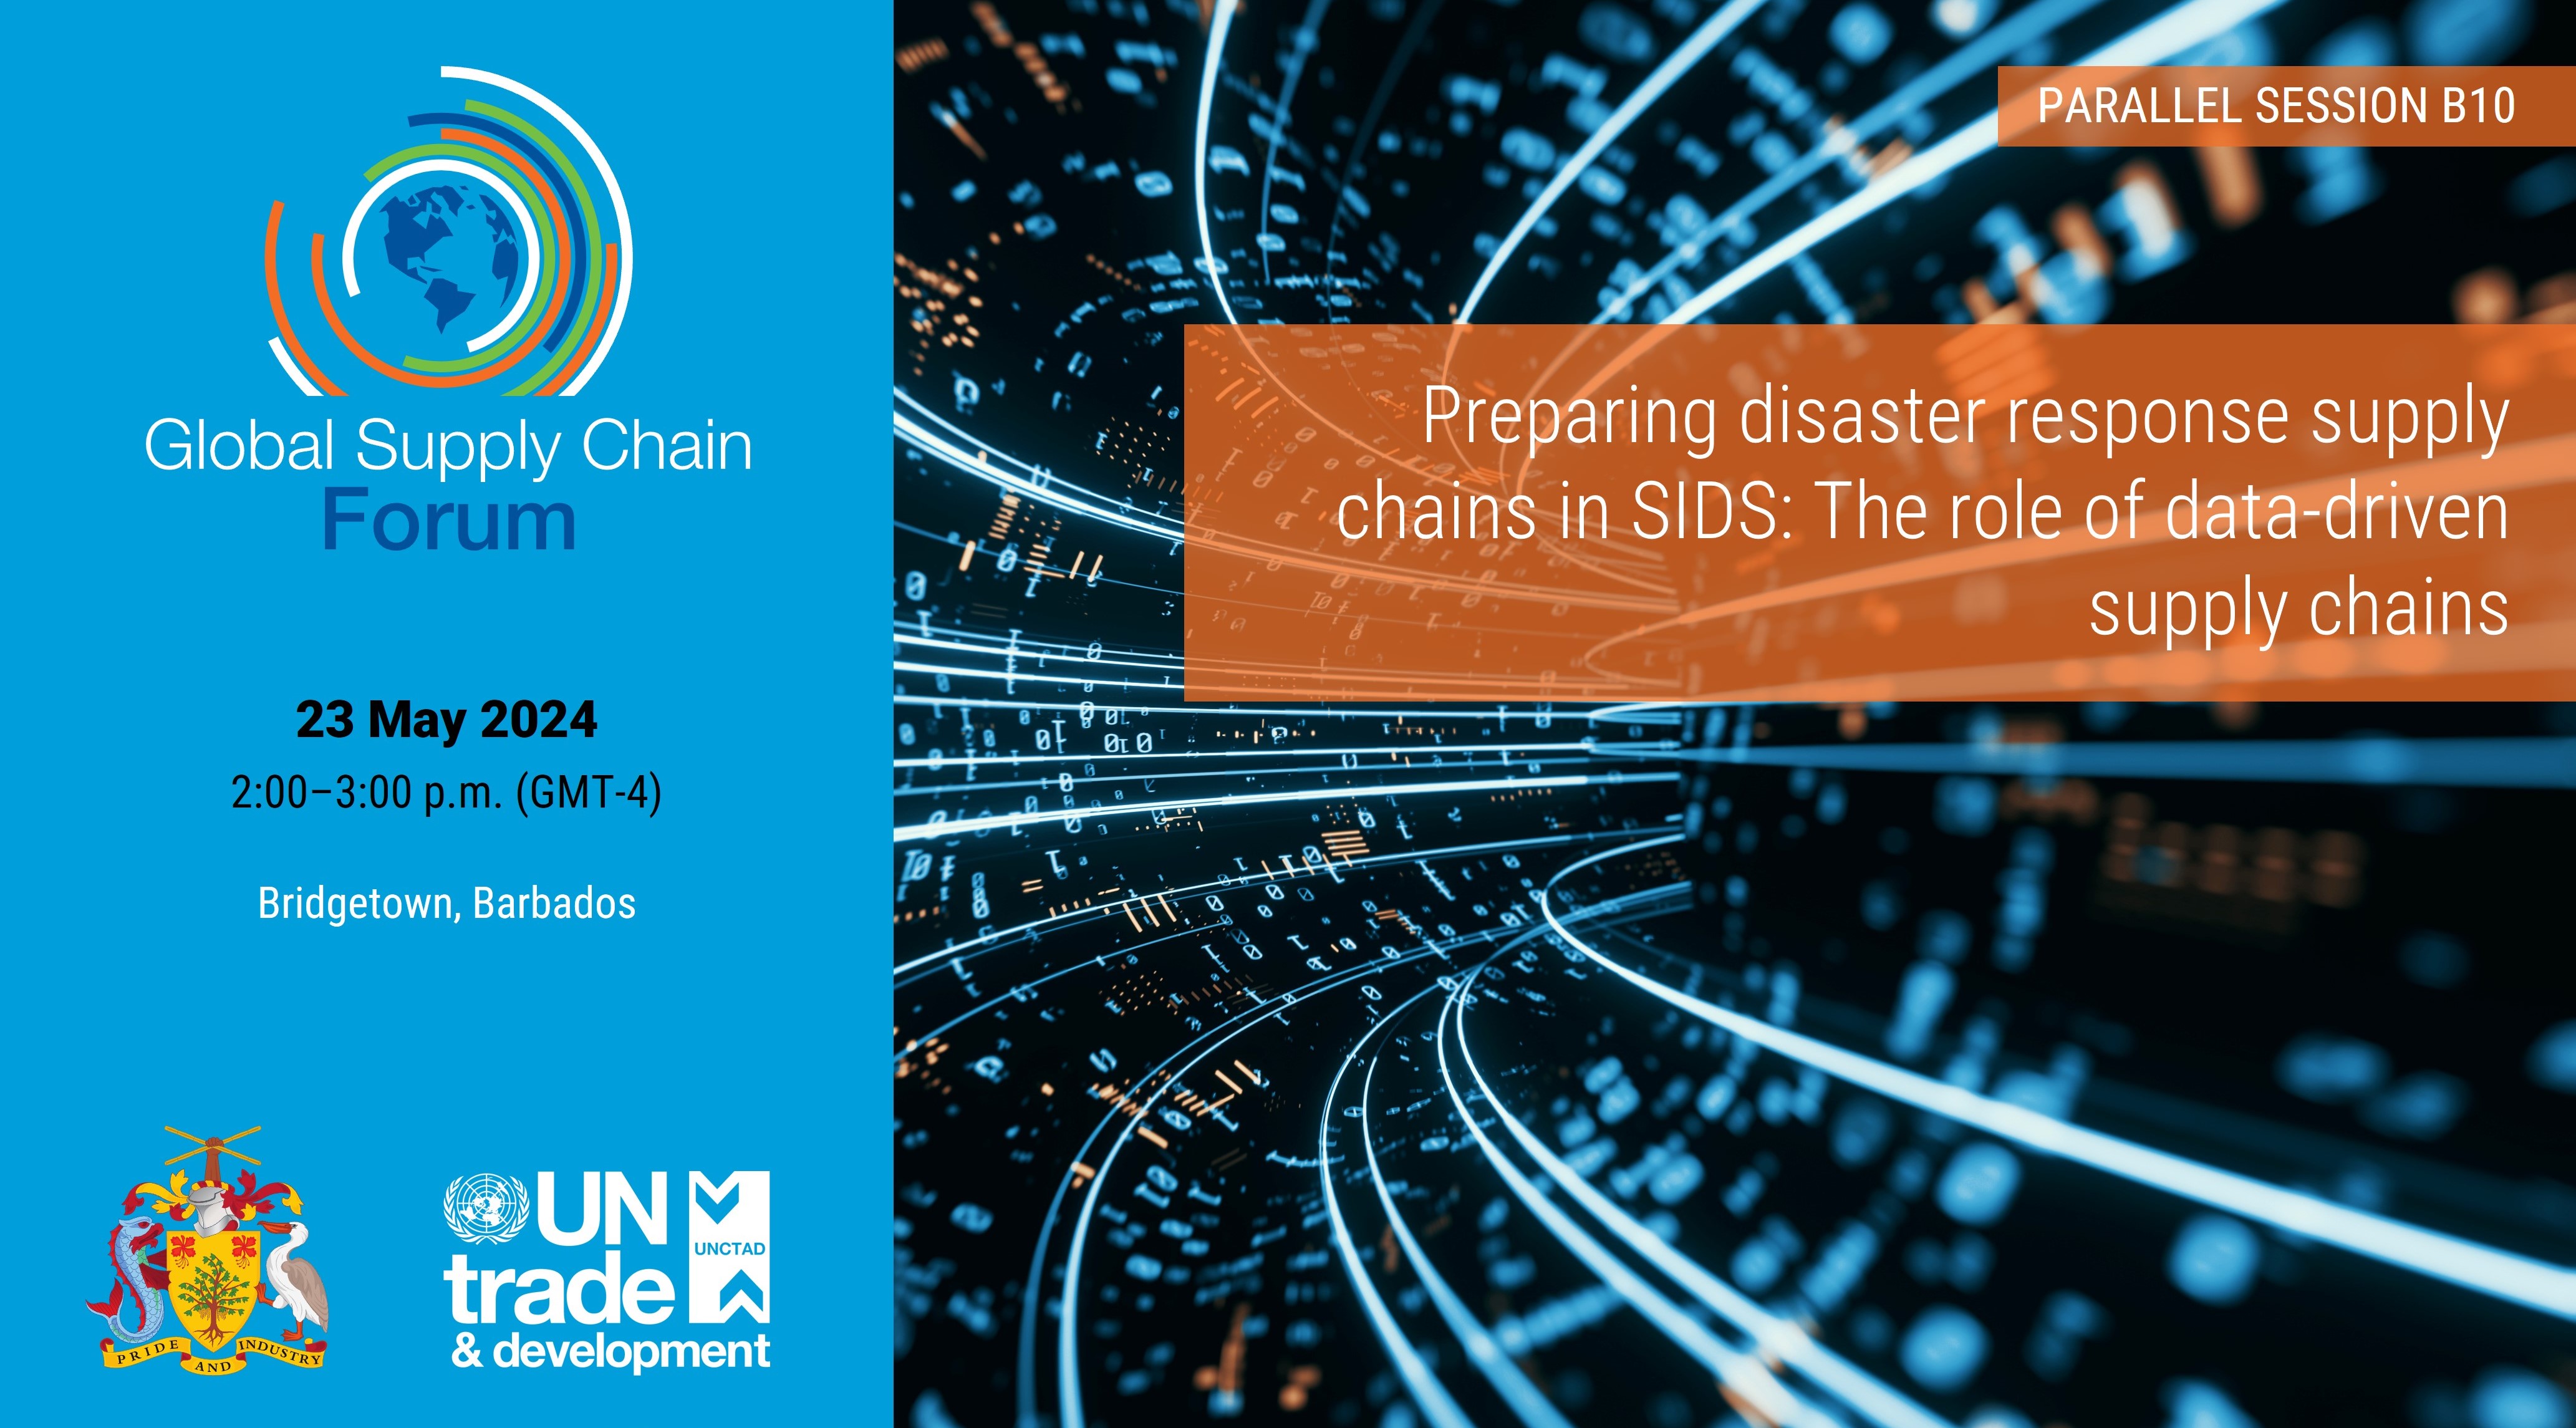 Preparing disaster response supply chains in Small Island Developing States: The role of data-driven supply chains